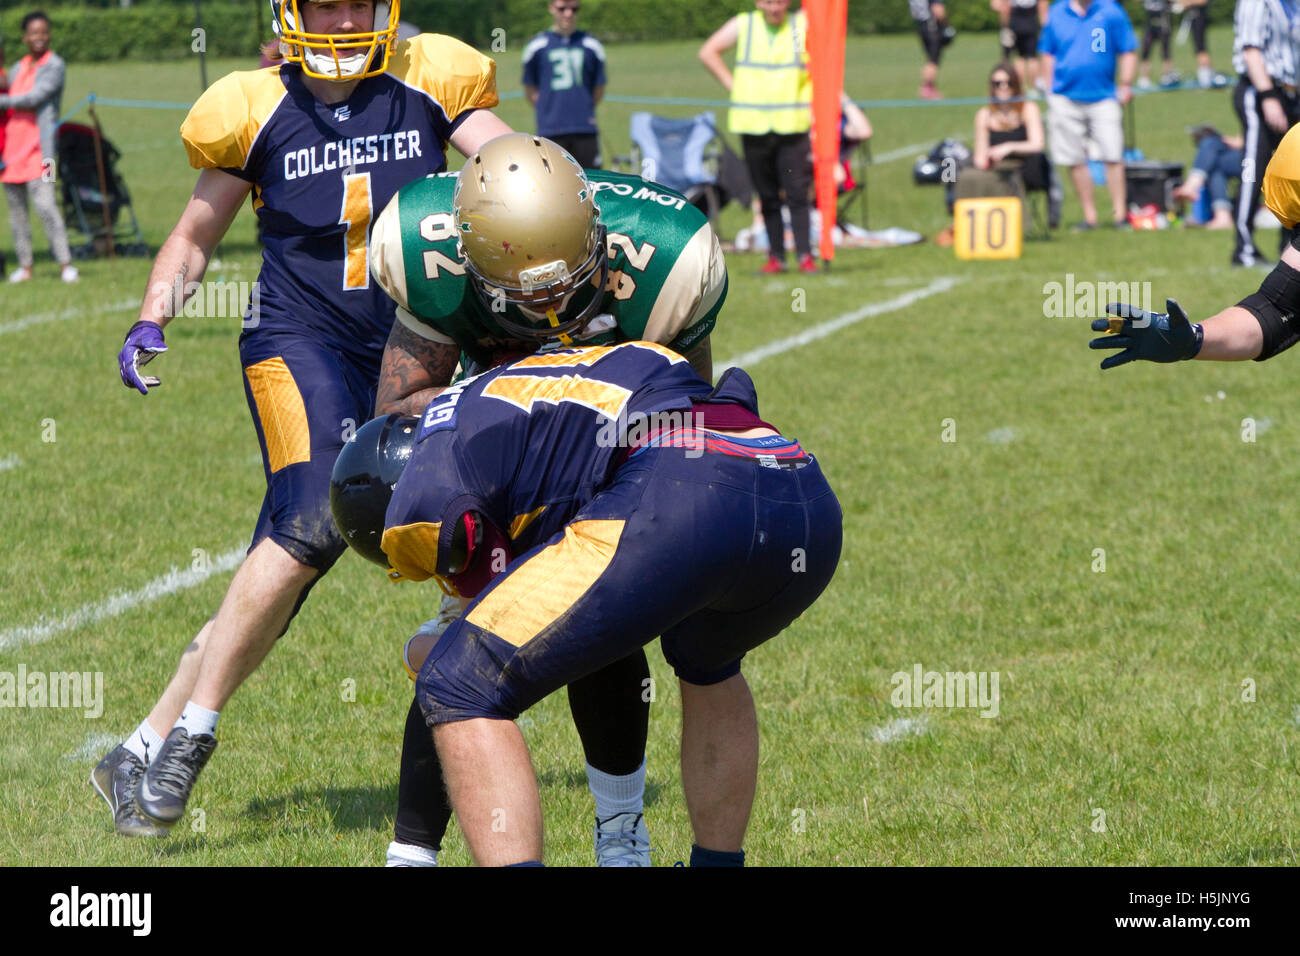 Odd bent over tackle in a British American football game Stock Photo